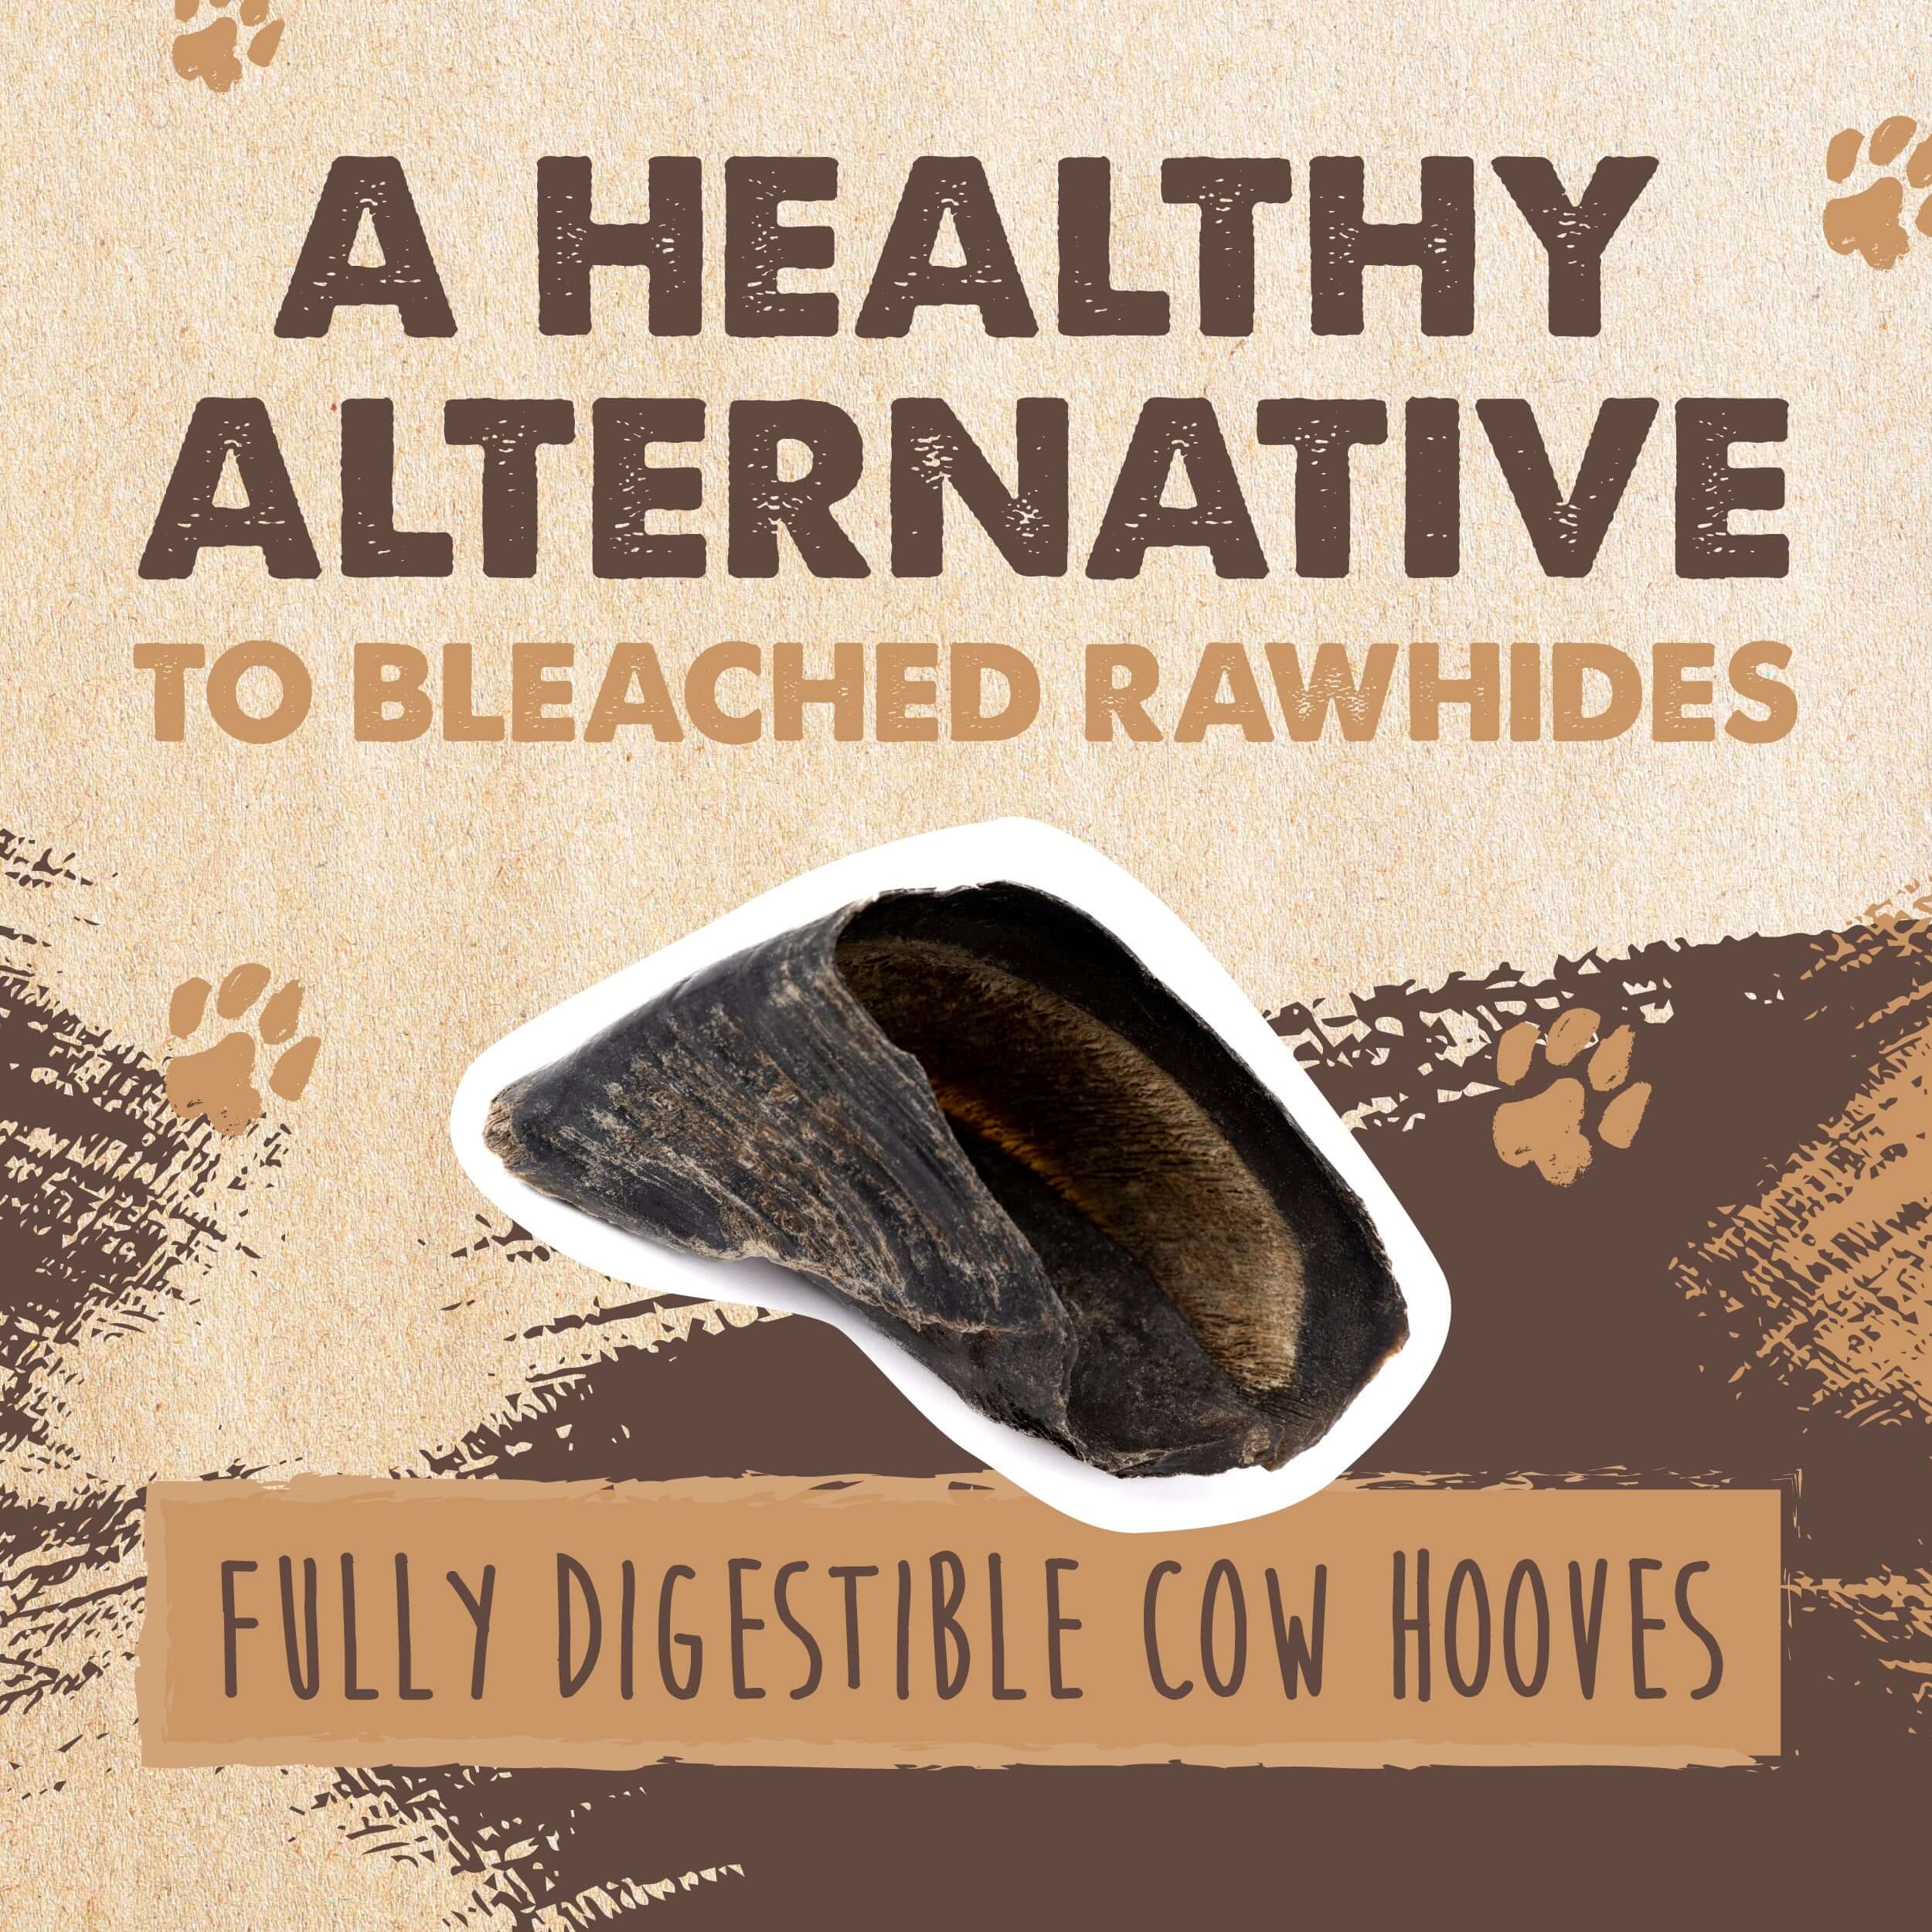 Cow Hooves (6 Pack) - All-Natural, Fully Digestible Chews for Dogs